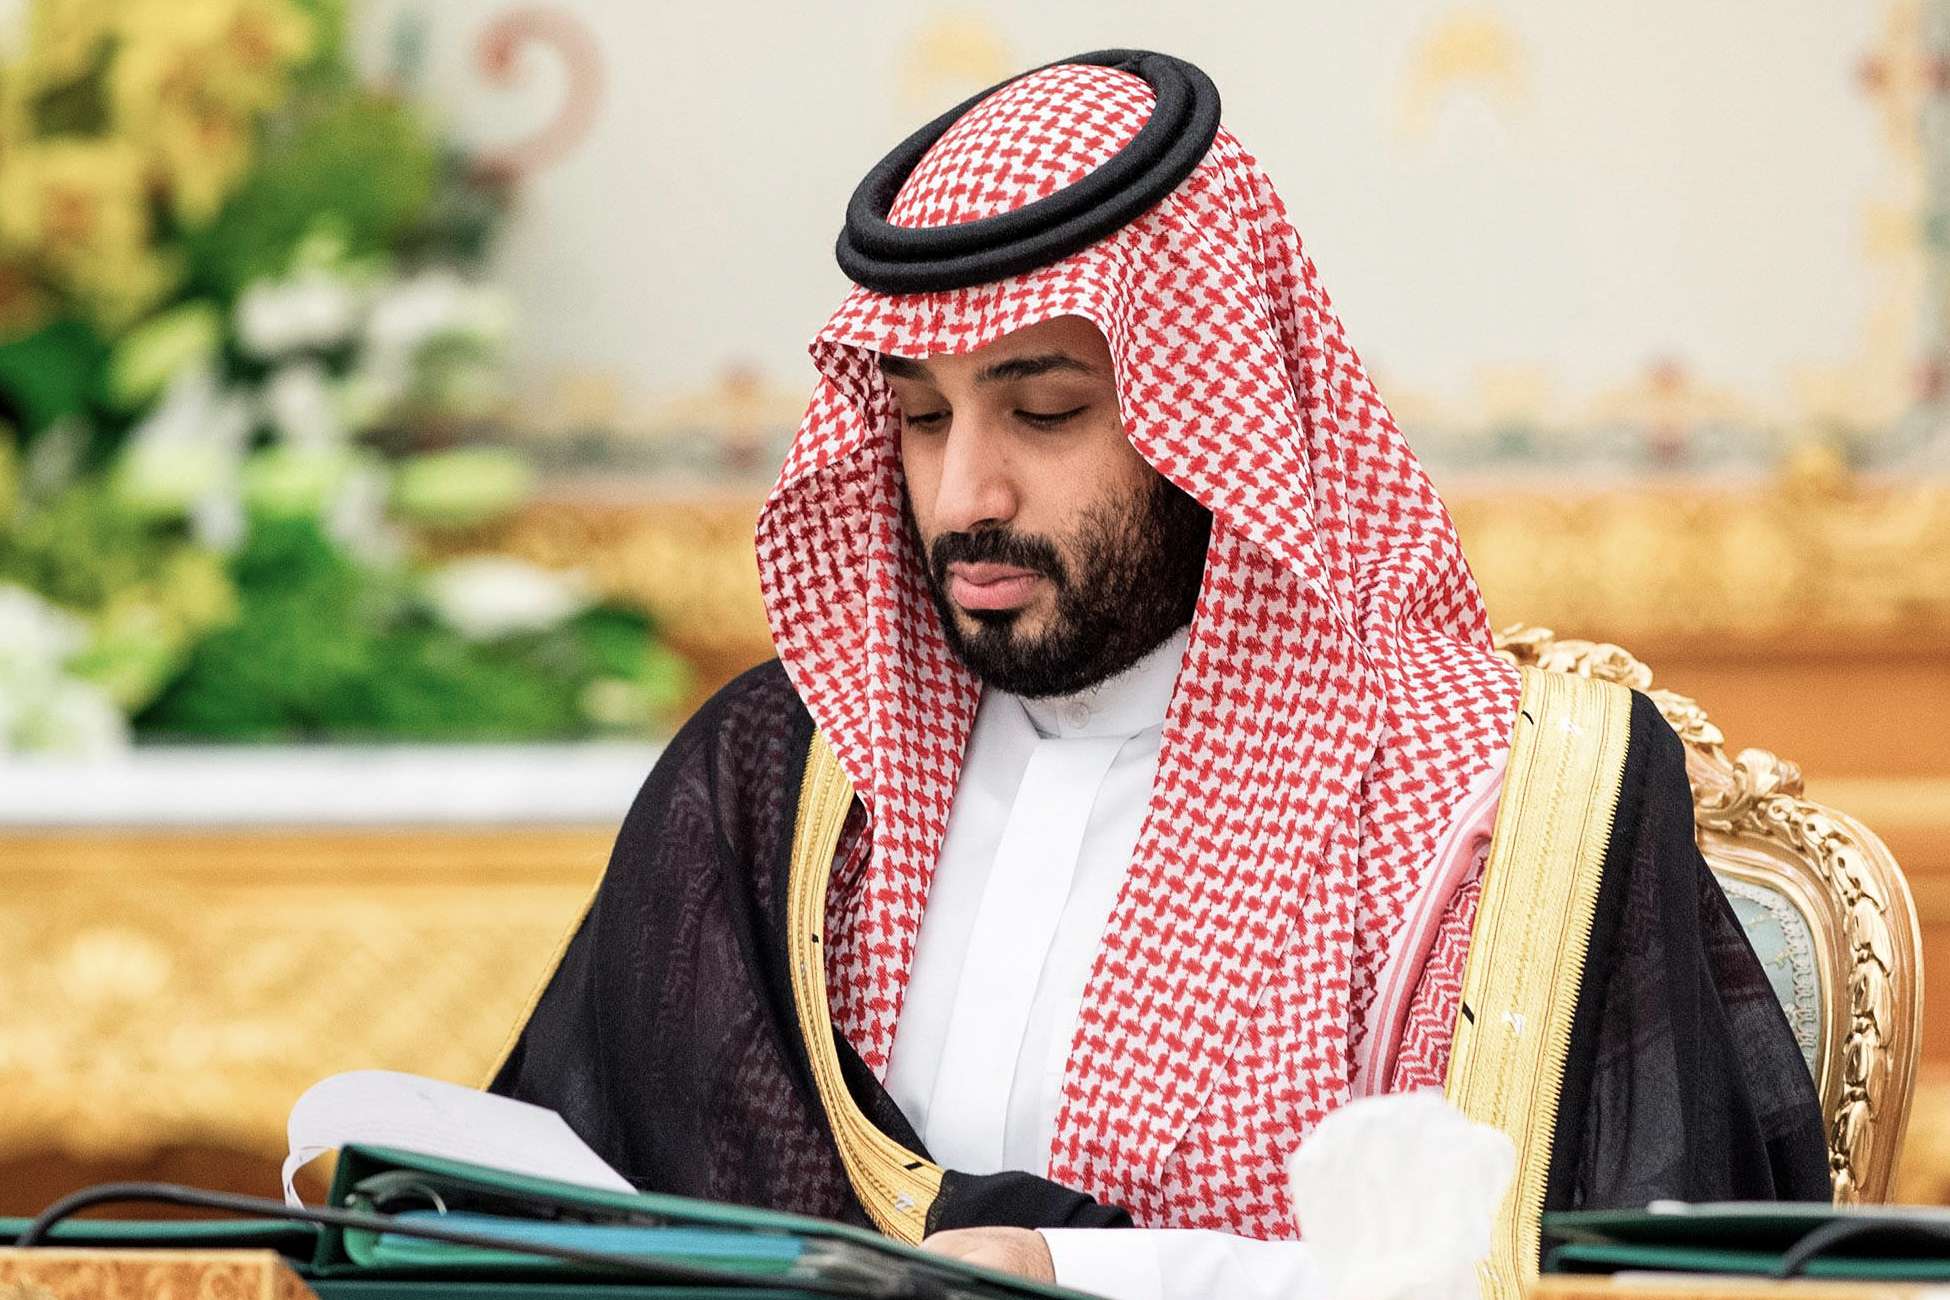 The prince is widely seen to be stamping out traces of internal dissent before a formal transfer of power from his father King Salman